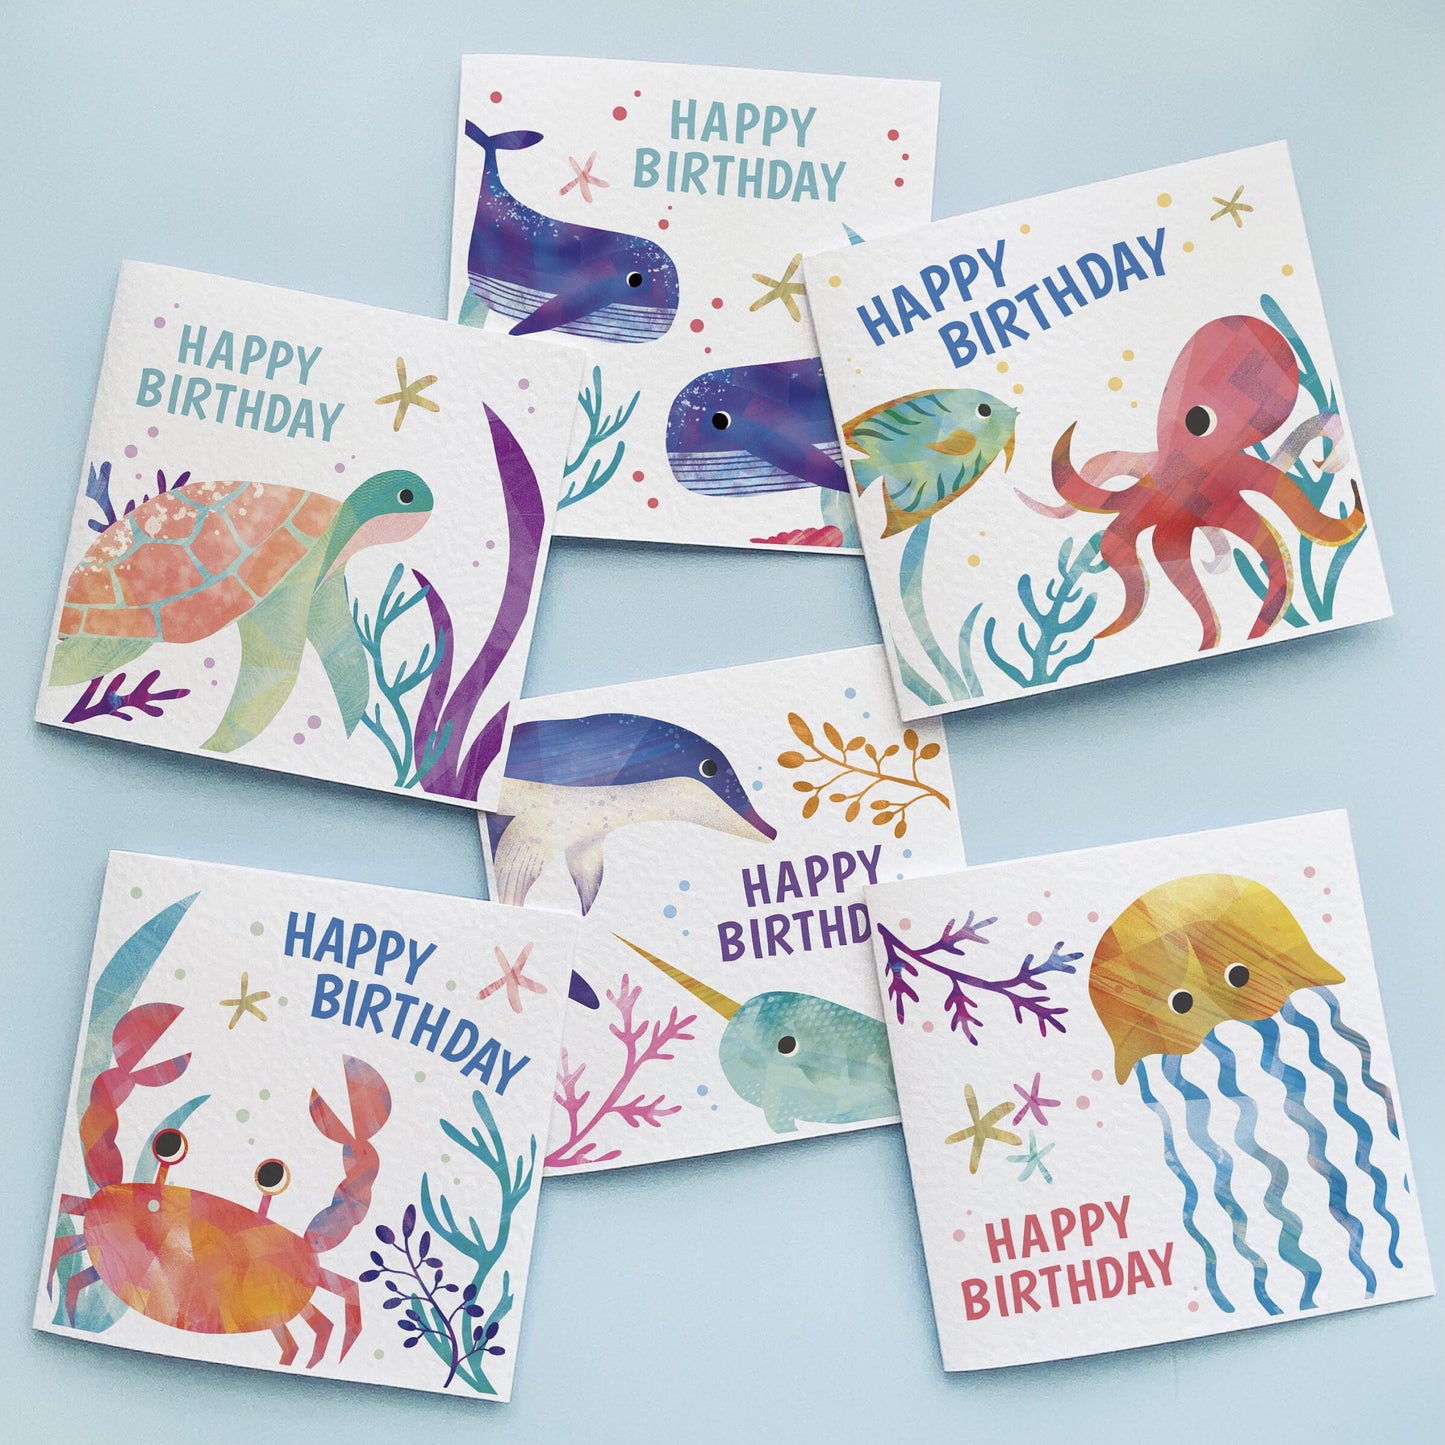 Adorable underwater scene with colorful fish and birthday cake illustration on a kids' sea themed birthday card.